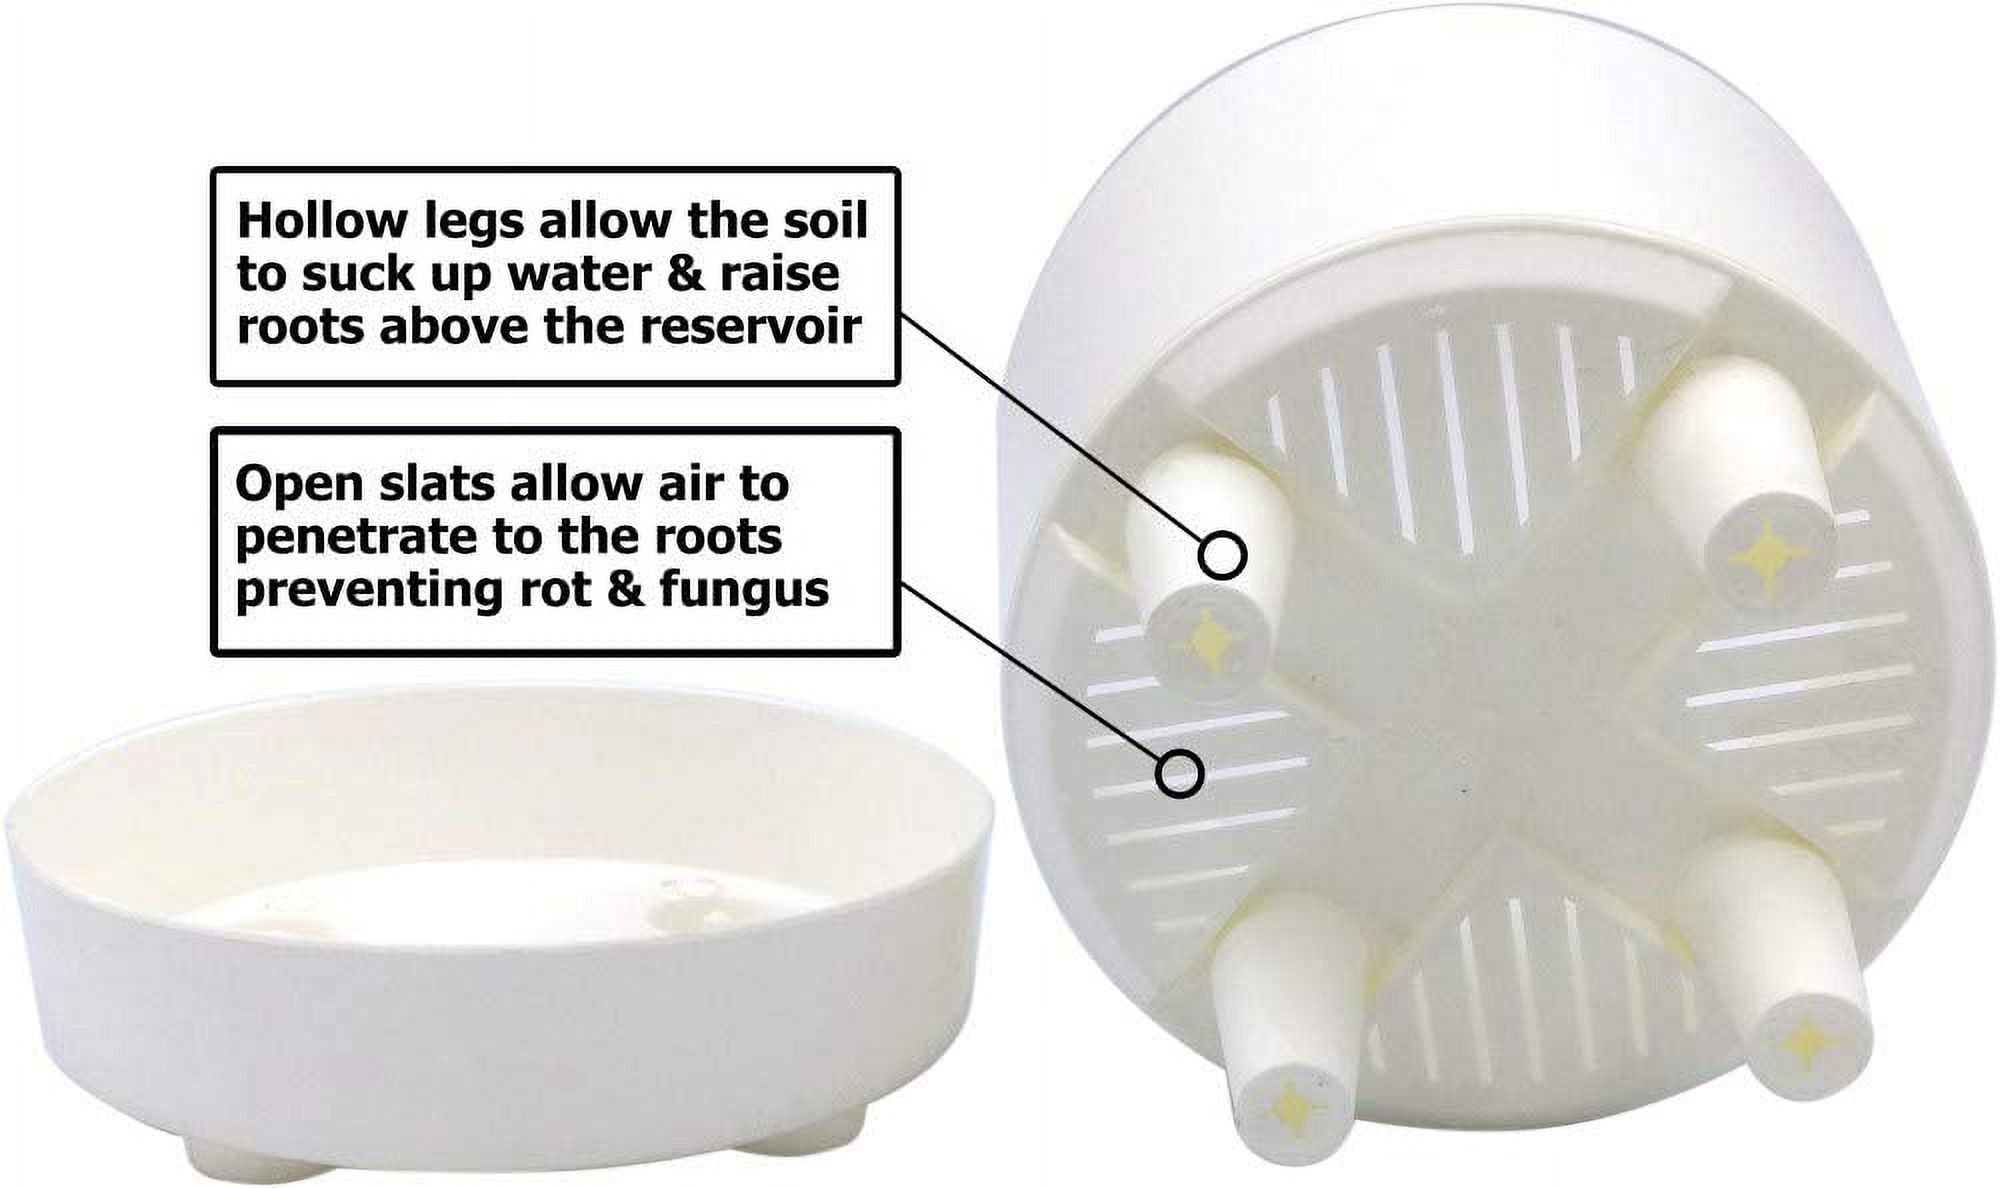 6" Self Watering + Self Aerating High Drainage Deep Reservoir Round Planter Pot Prevents Mold, Root Rot & Soil Fungus in Herbs, Succulents, for Indoor & Outdoor & Windowsill Gardens (White) - image 3 of 4